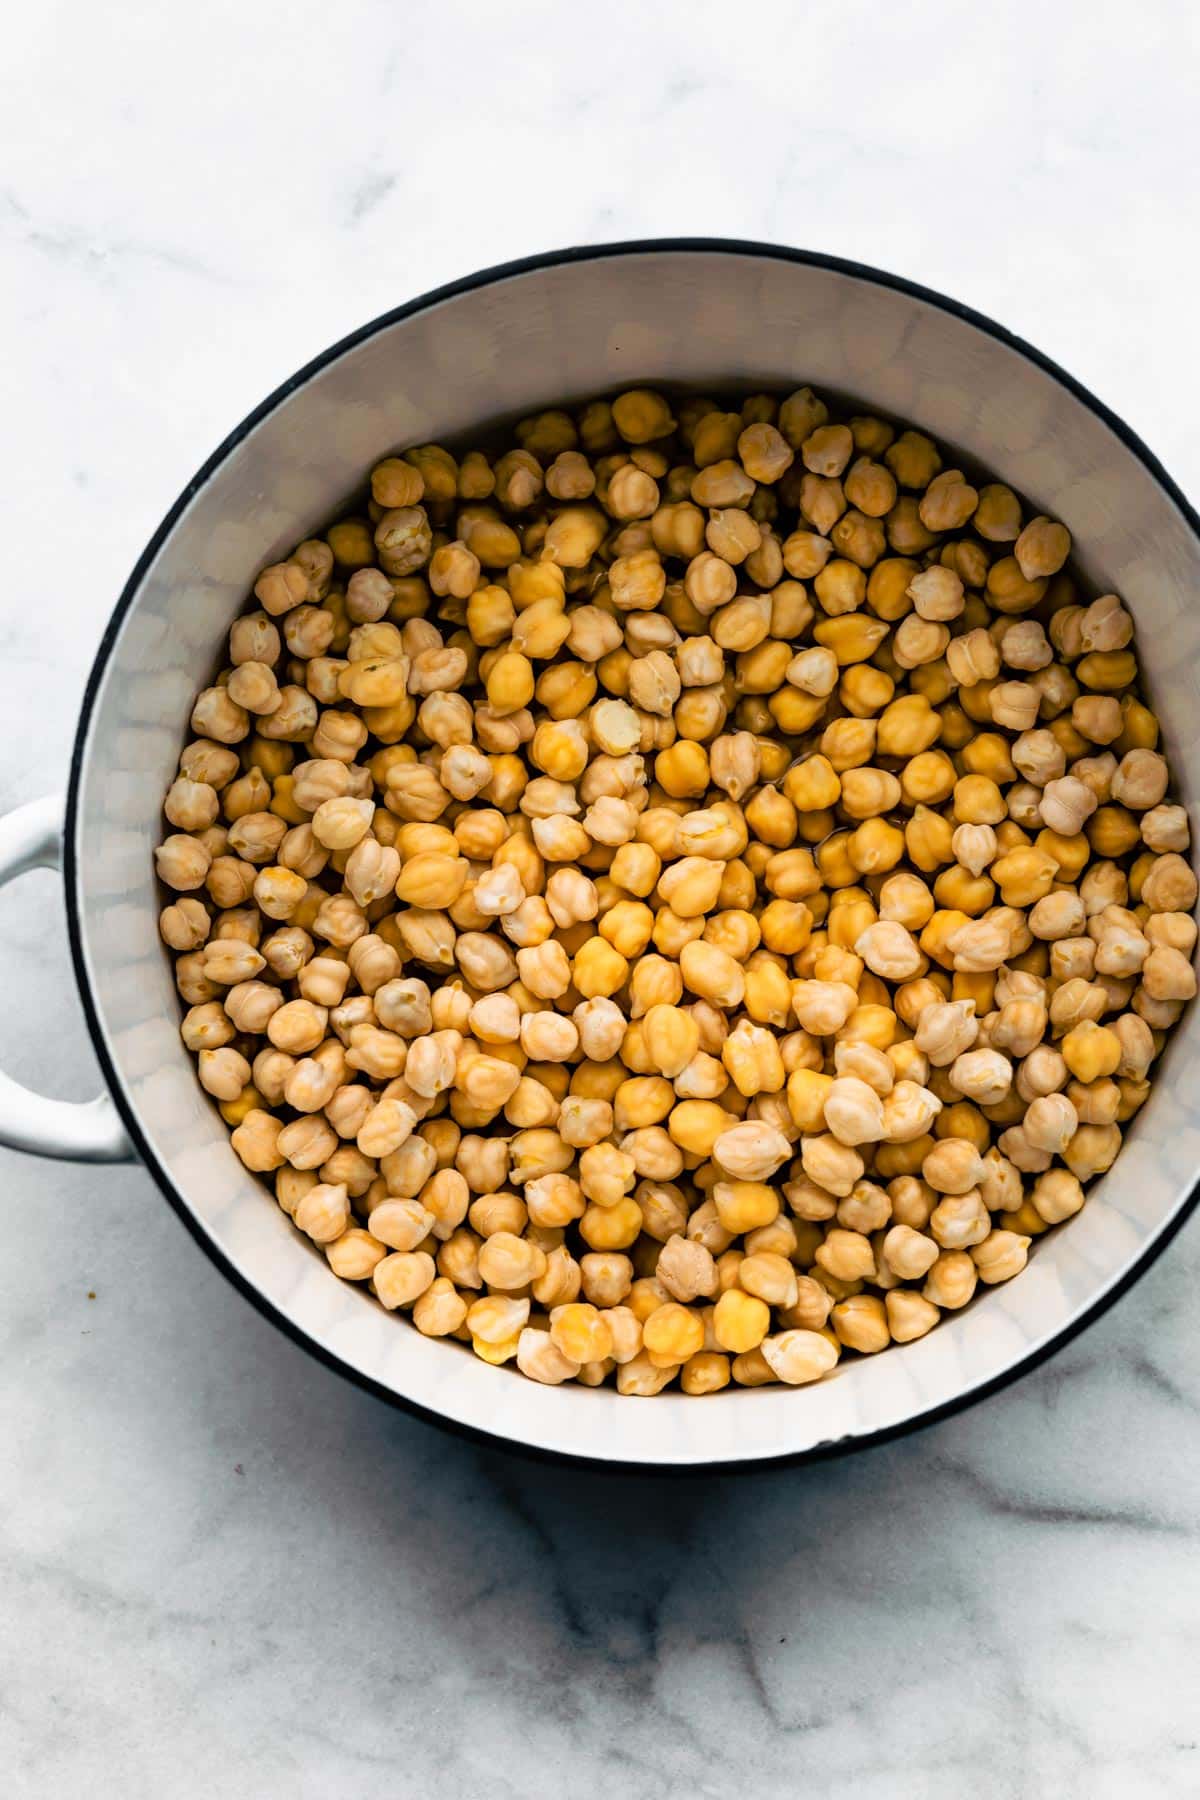 Overhead shot of a pot full of Chickpeas.